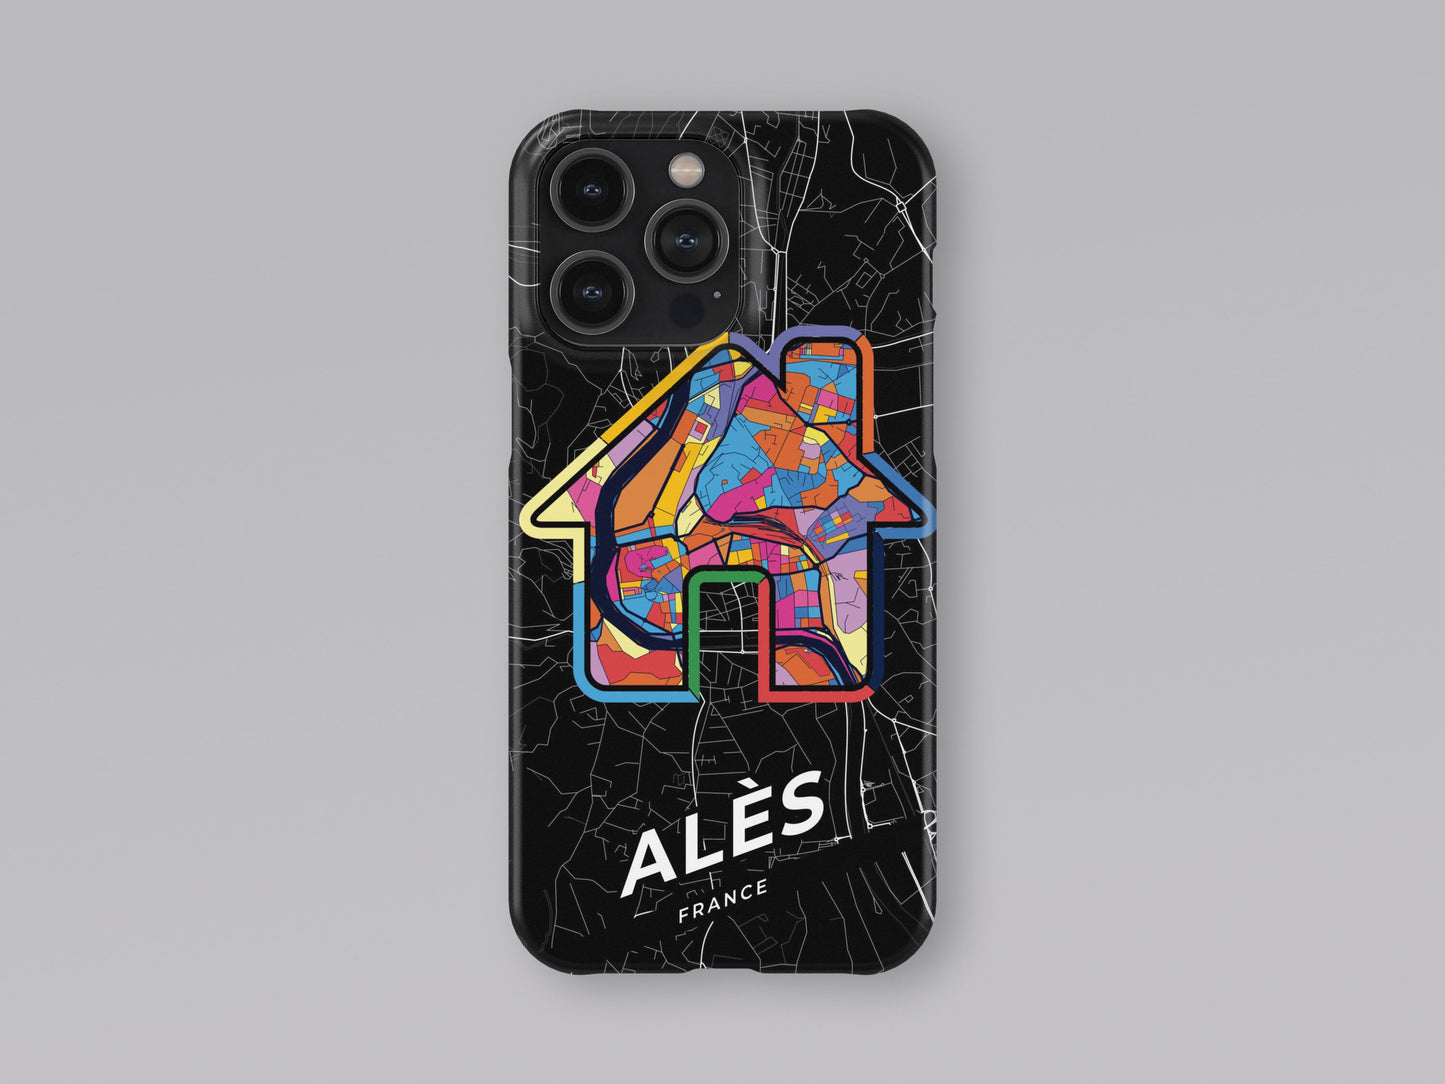 Alès France slim phone case with colorful icon. Birthday, wedding or housewarming gift. Couple match cases. 3